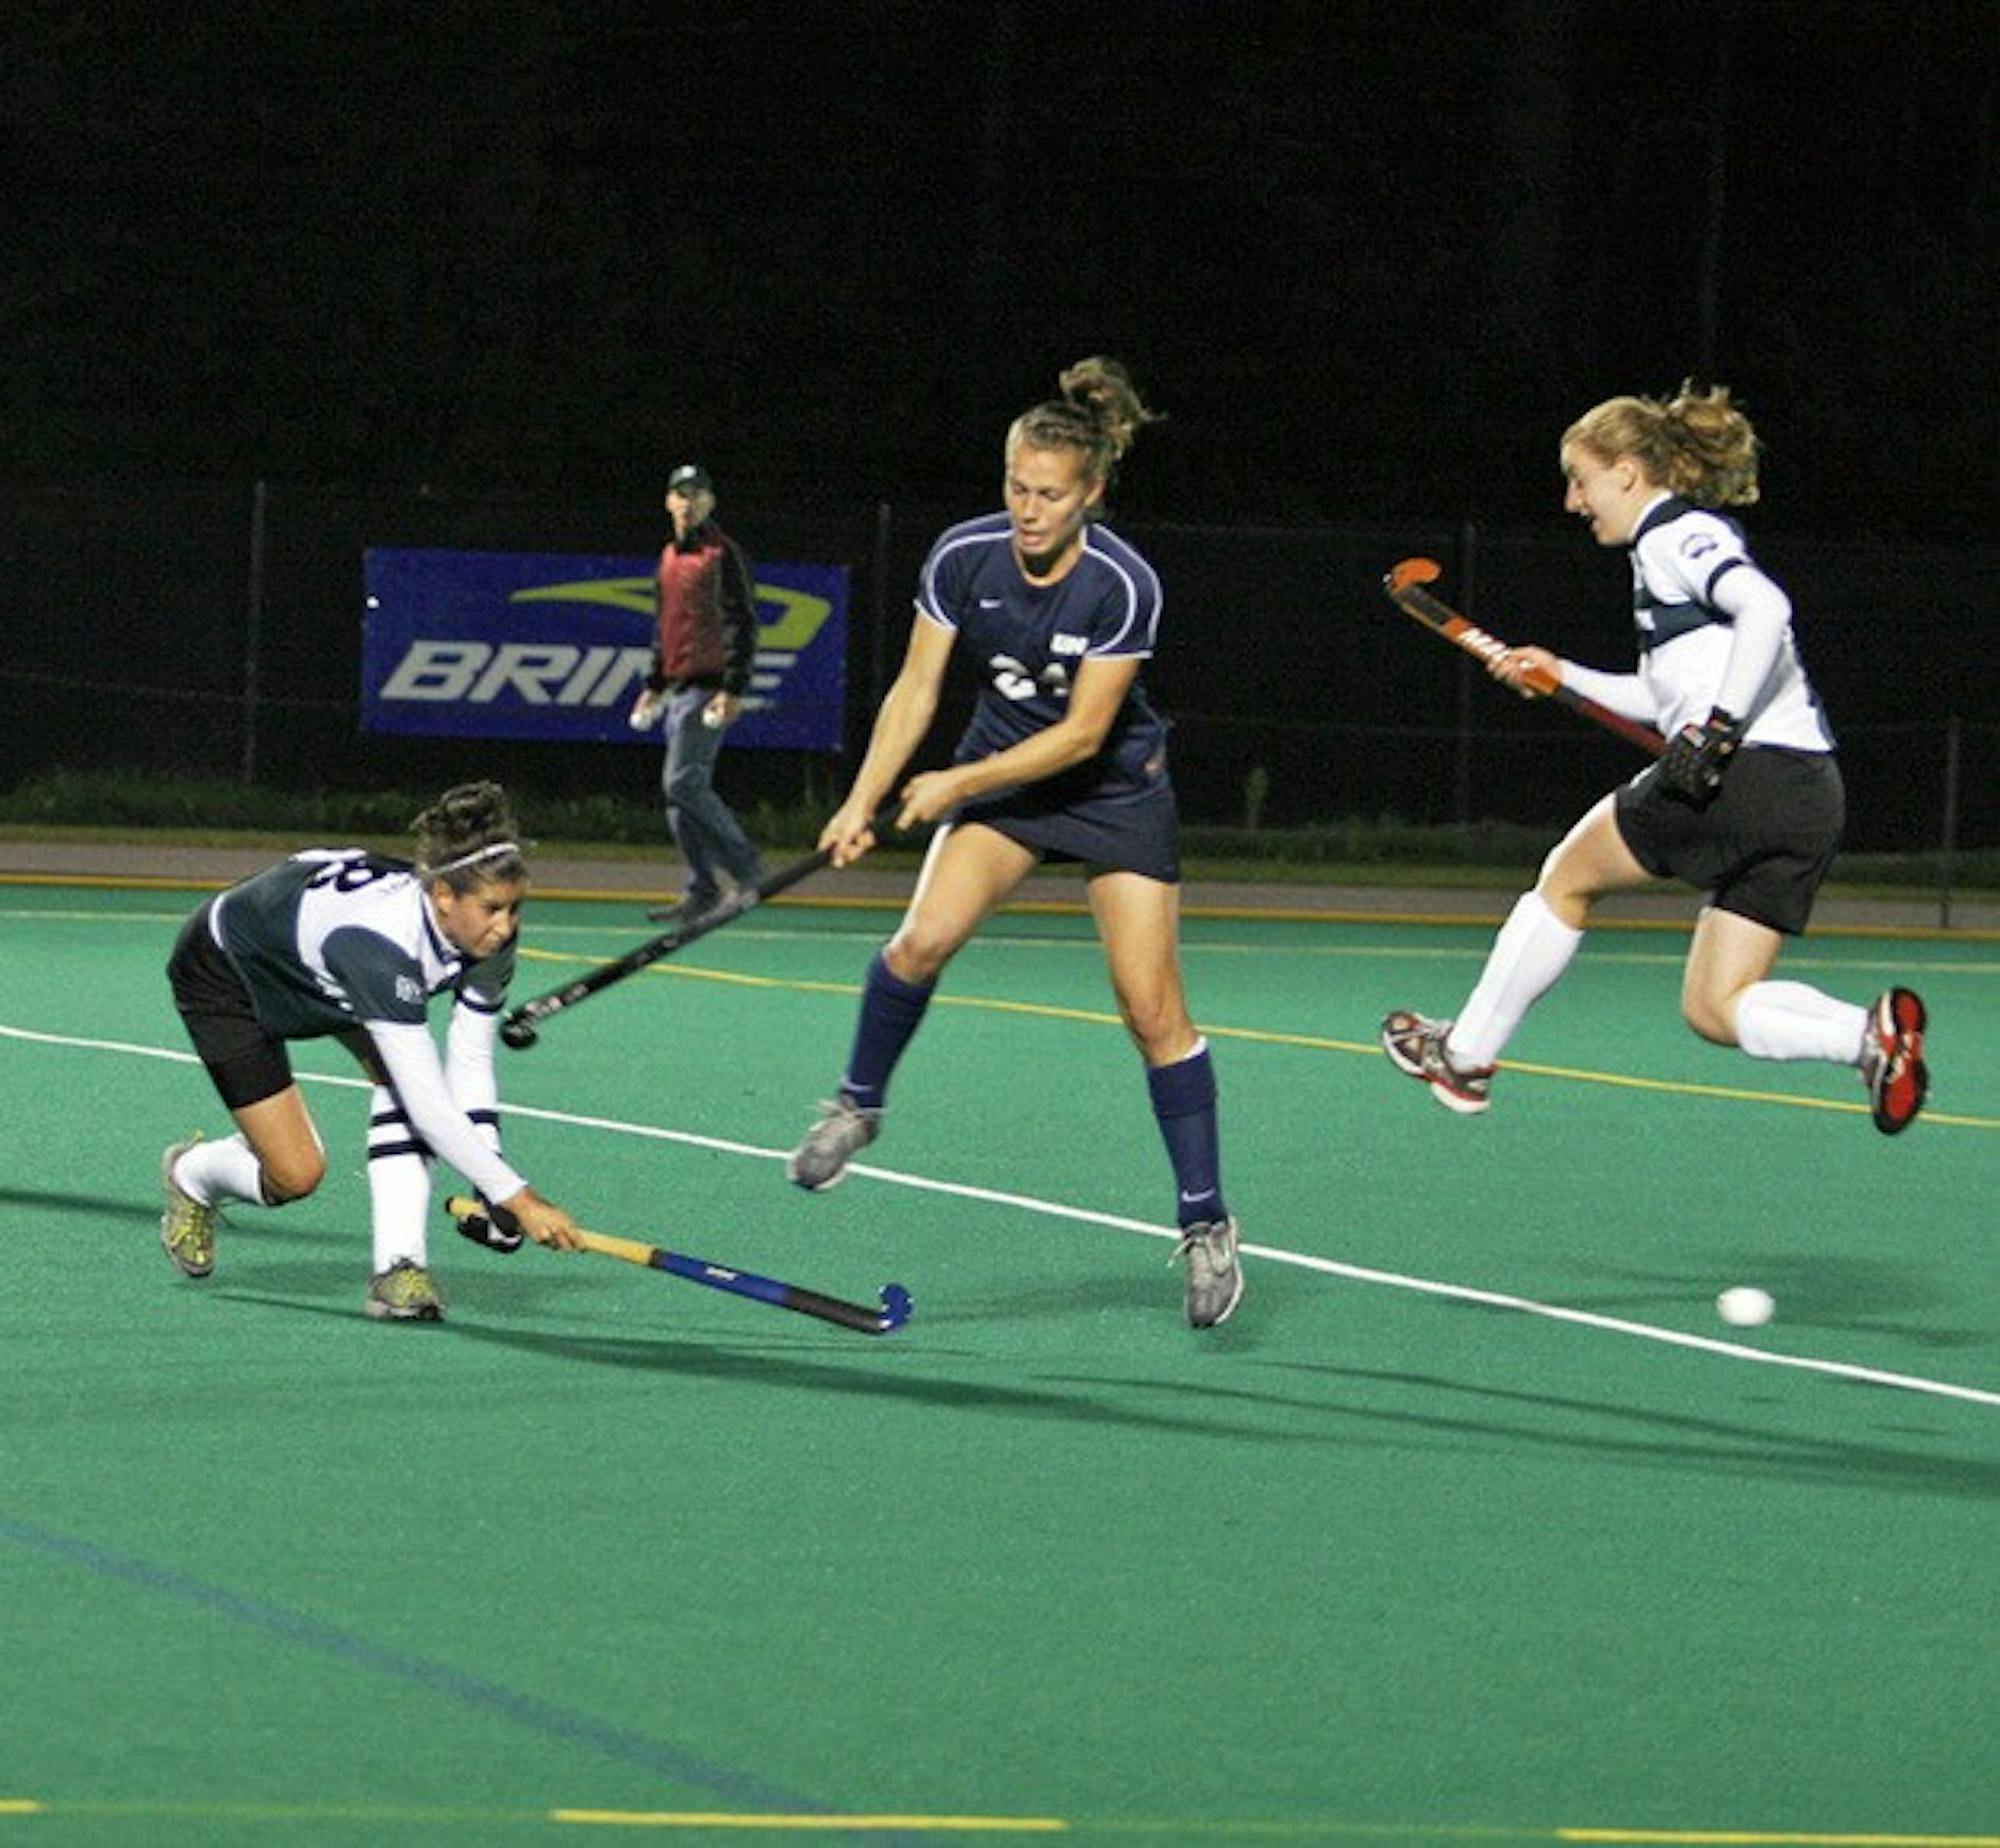 It took three overtimes and a stroke-off, but Dartmouth field hockey took down UNH for its first win in seven games.